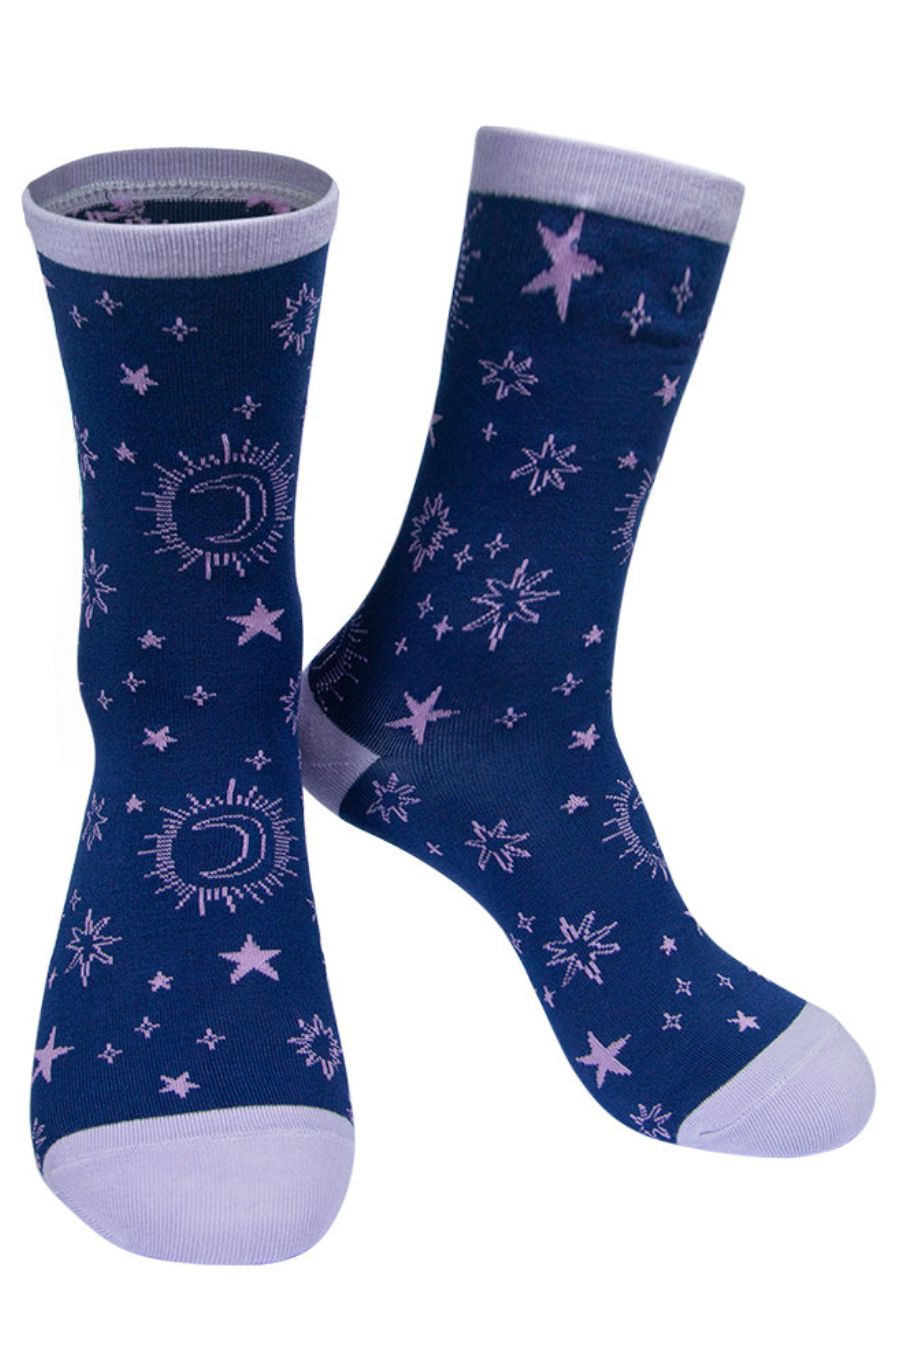 navy blue and lilac bamboo socks with a scattered stars and moon pattern